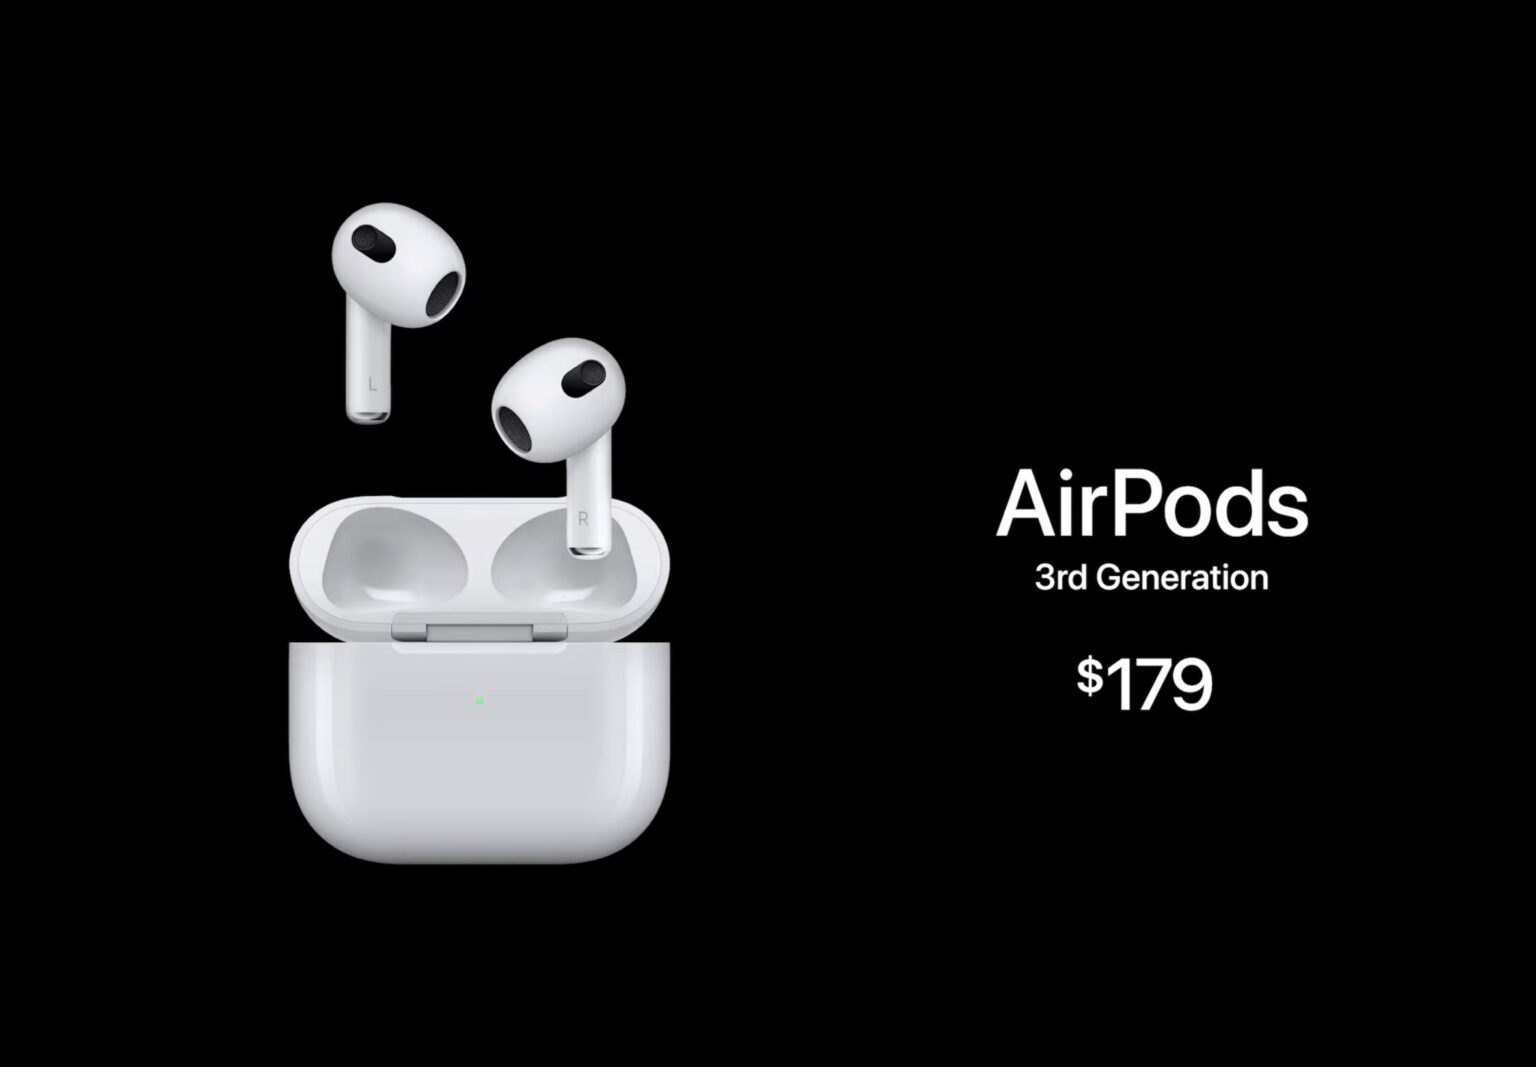 The new AirPods 3 are $179.